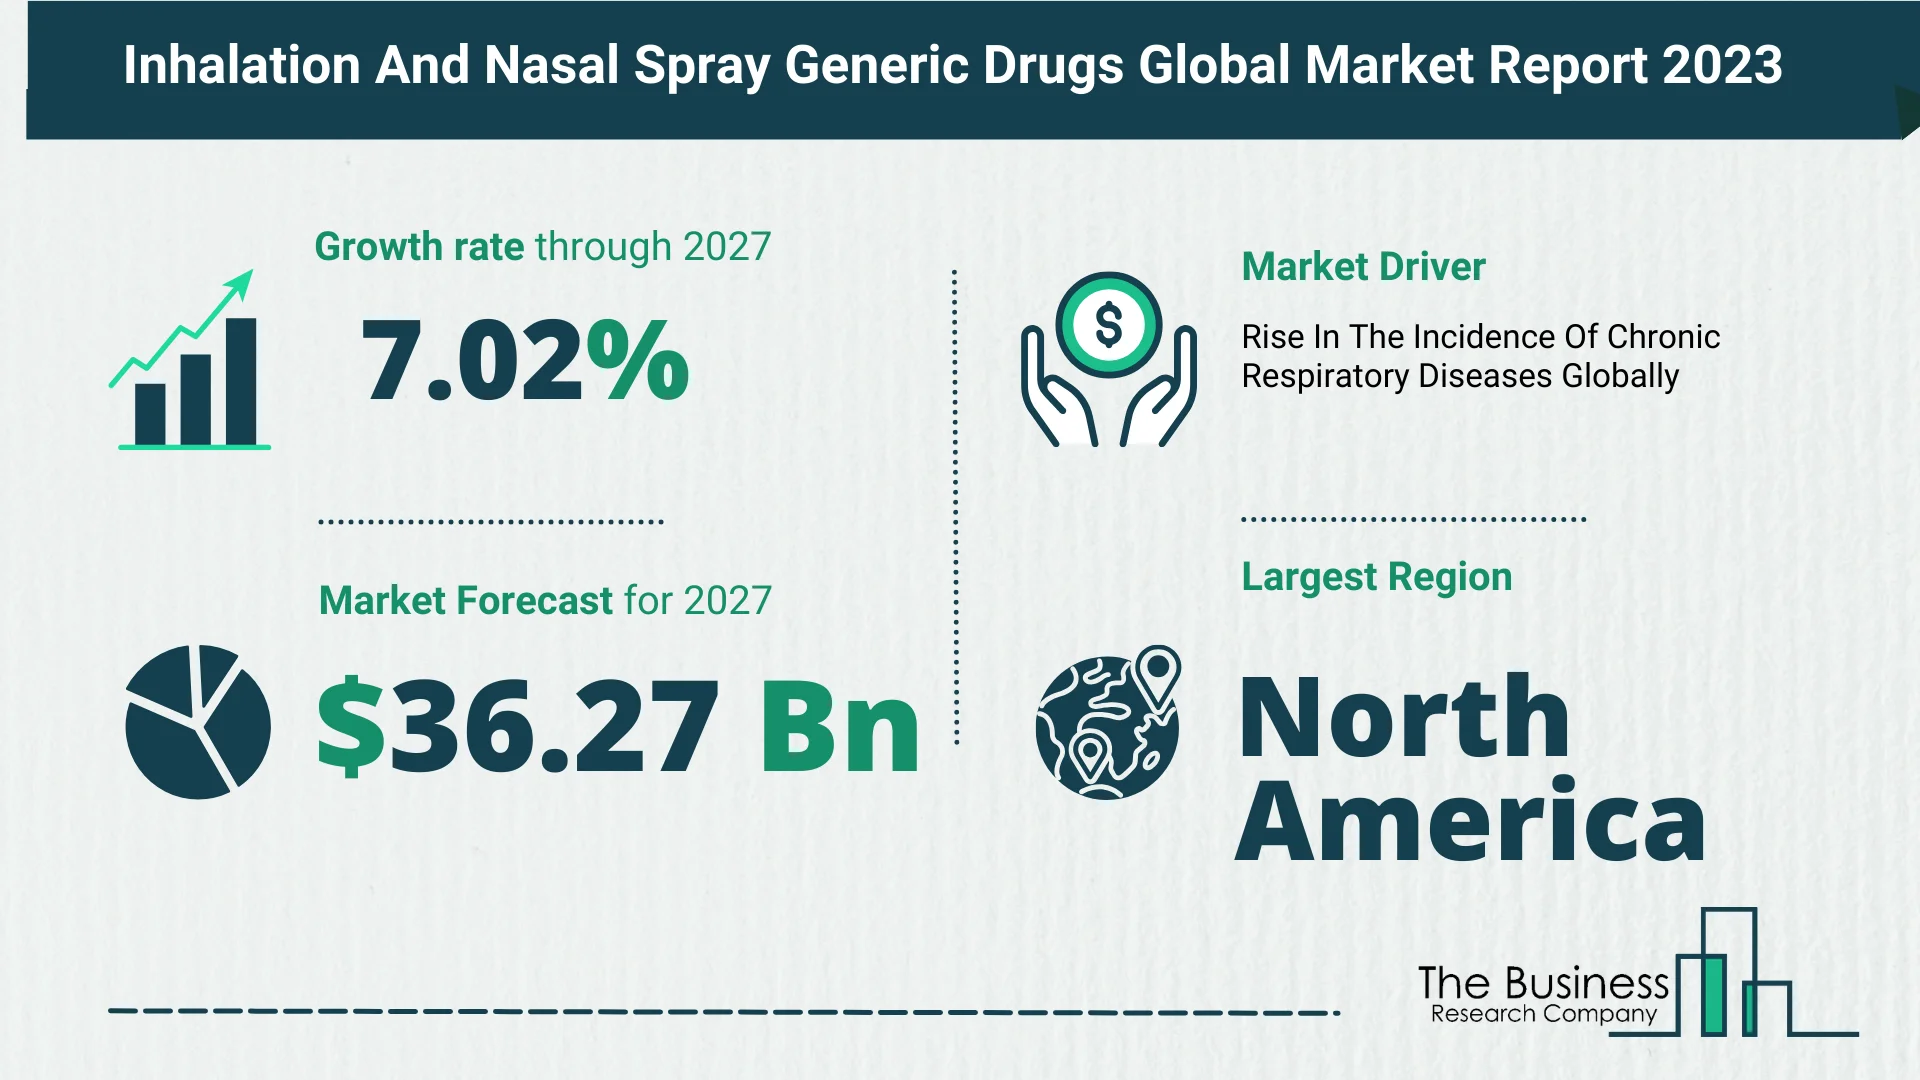 Top 5 Insights From The Inhalation And Nasal Spray Generic Drugs Market Report 2023